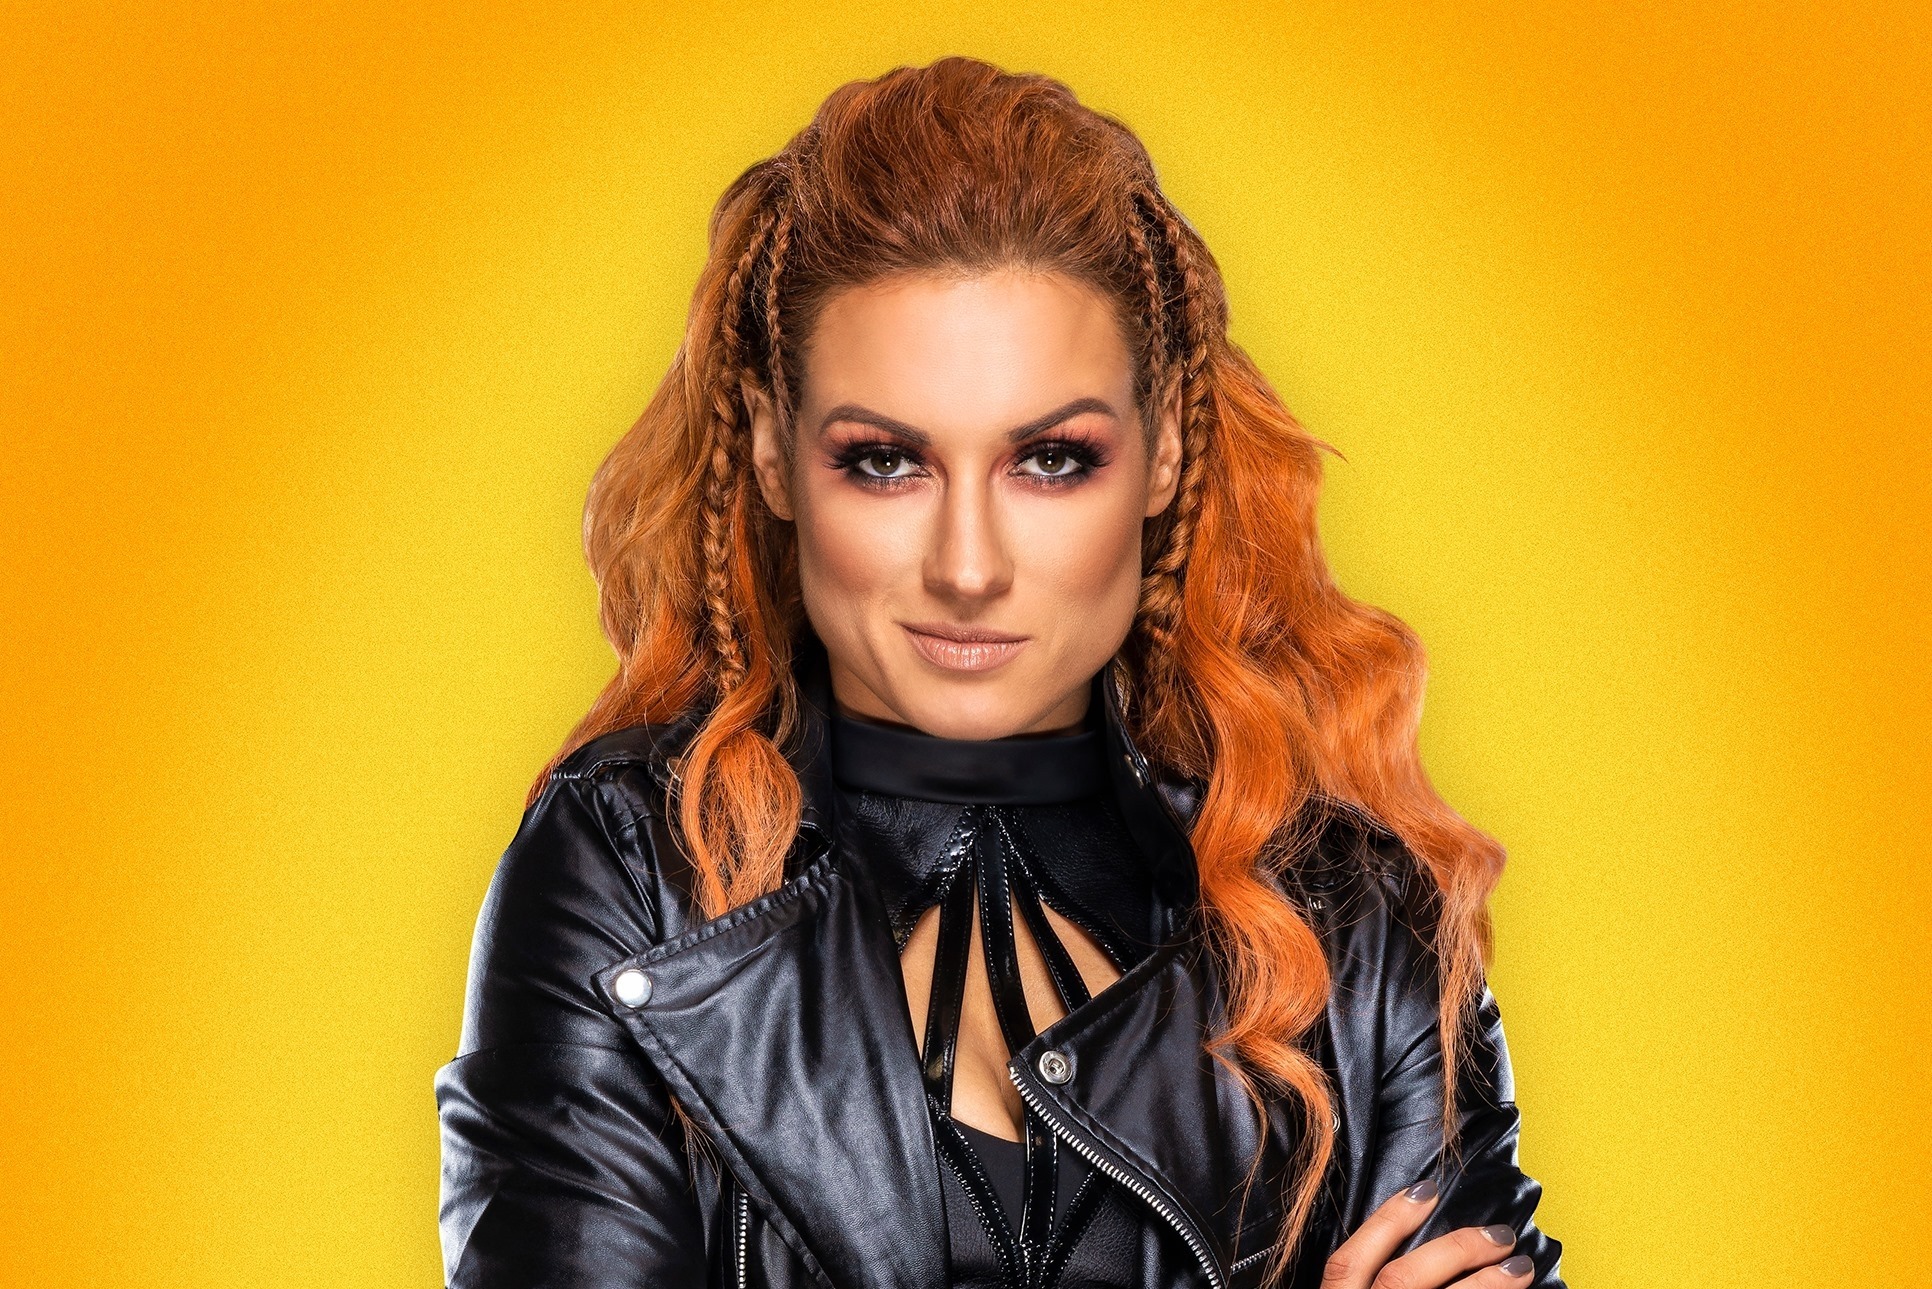 Becky Lynch will no longer be appearing at WWE Superstar Spectacle due to  an airport issue #beckylynch #briebella #cardib #wwe #raw…